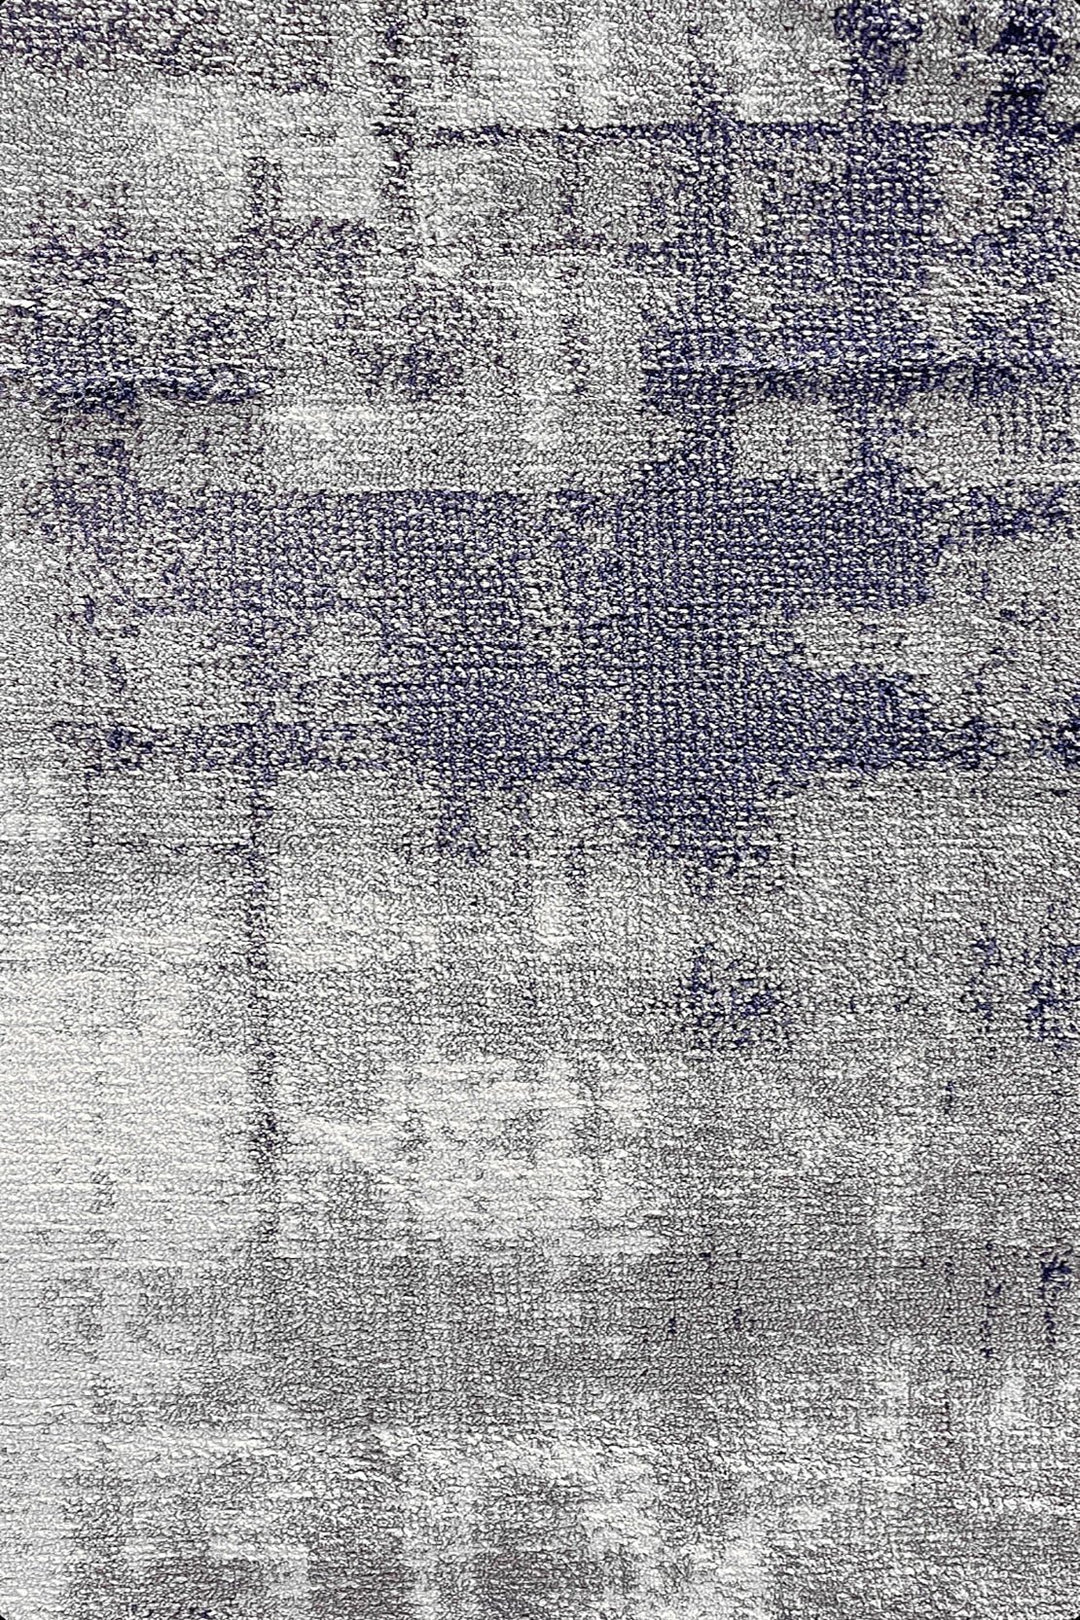 Berlin - 13-Foot Wide Wall-to-Wall Carpet, Blue - V Surfaces